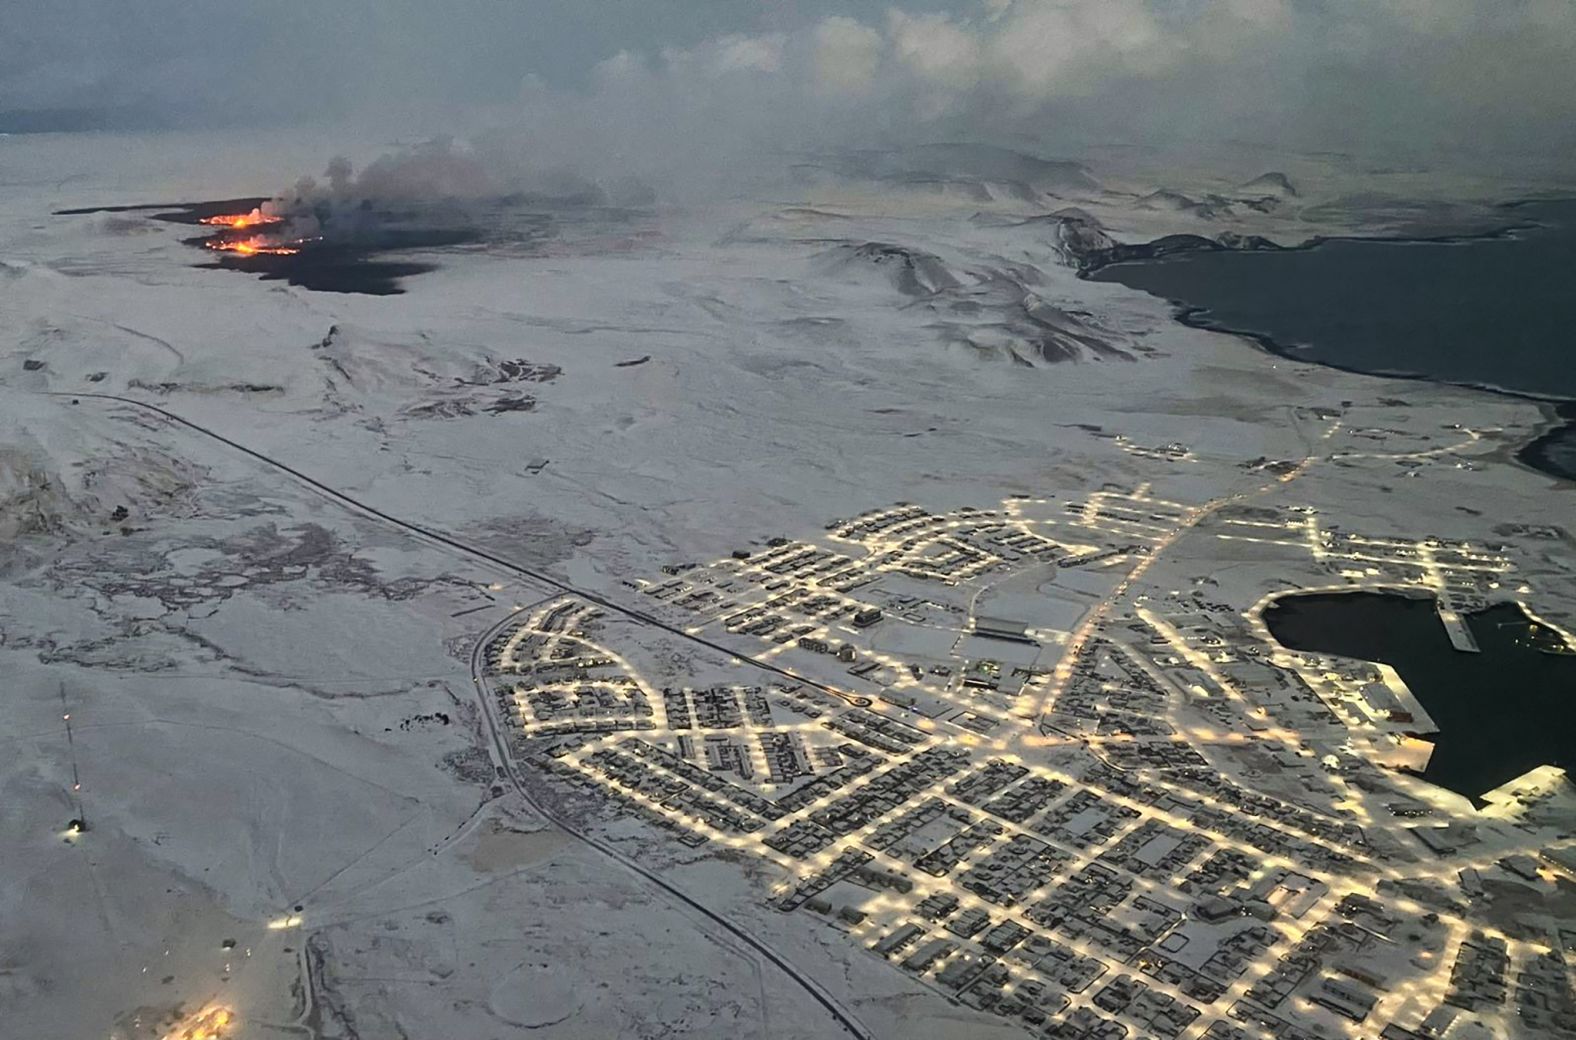 The evacuated Icelandic town of Grindavik, right, is seen as smoke billows and lava is thrown into the air during the volcanic eruption.